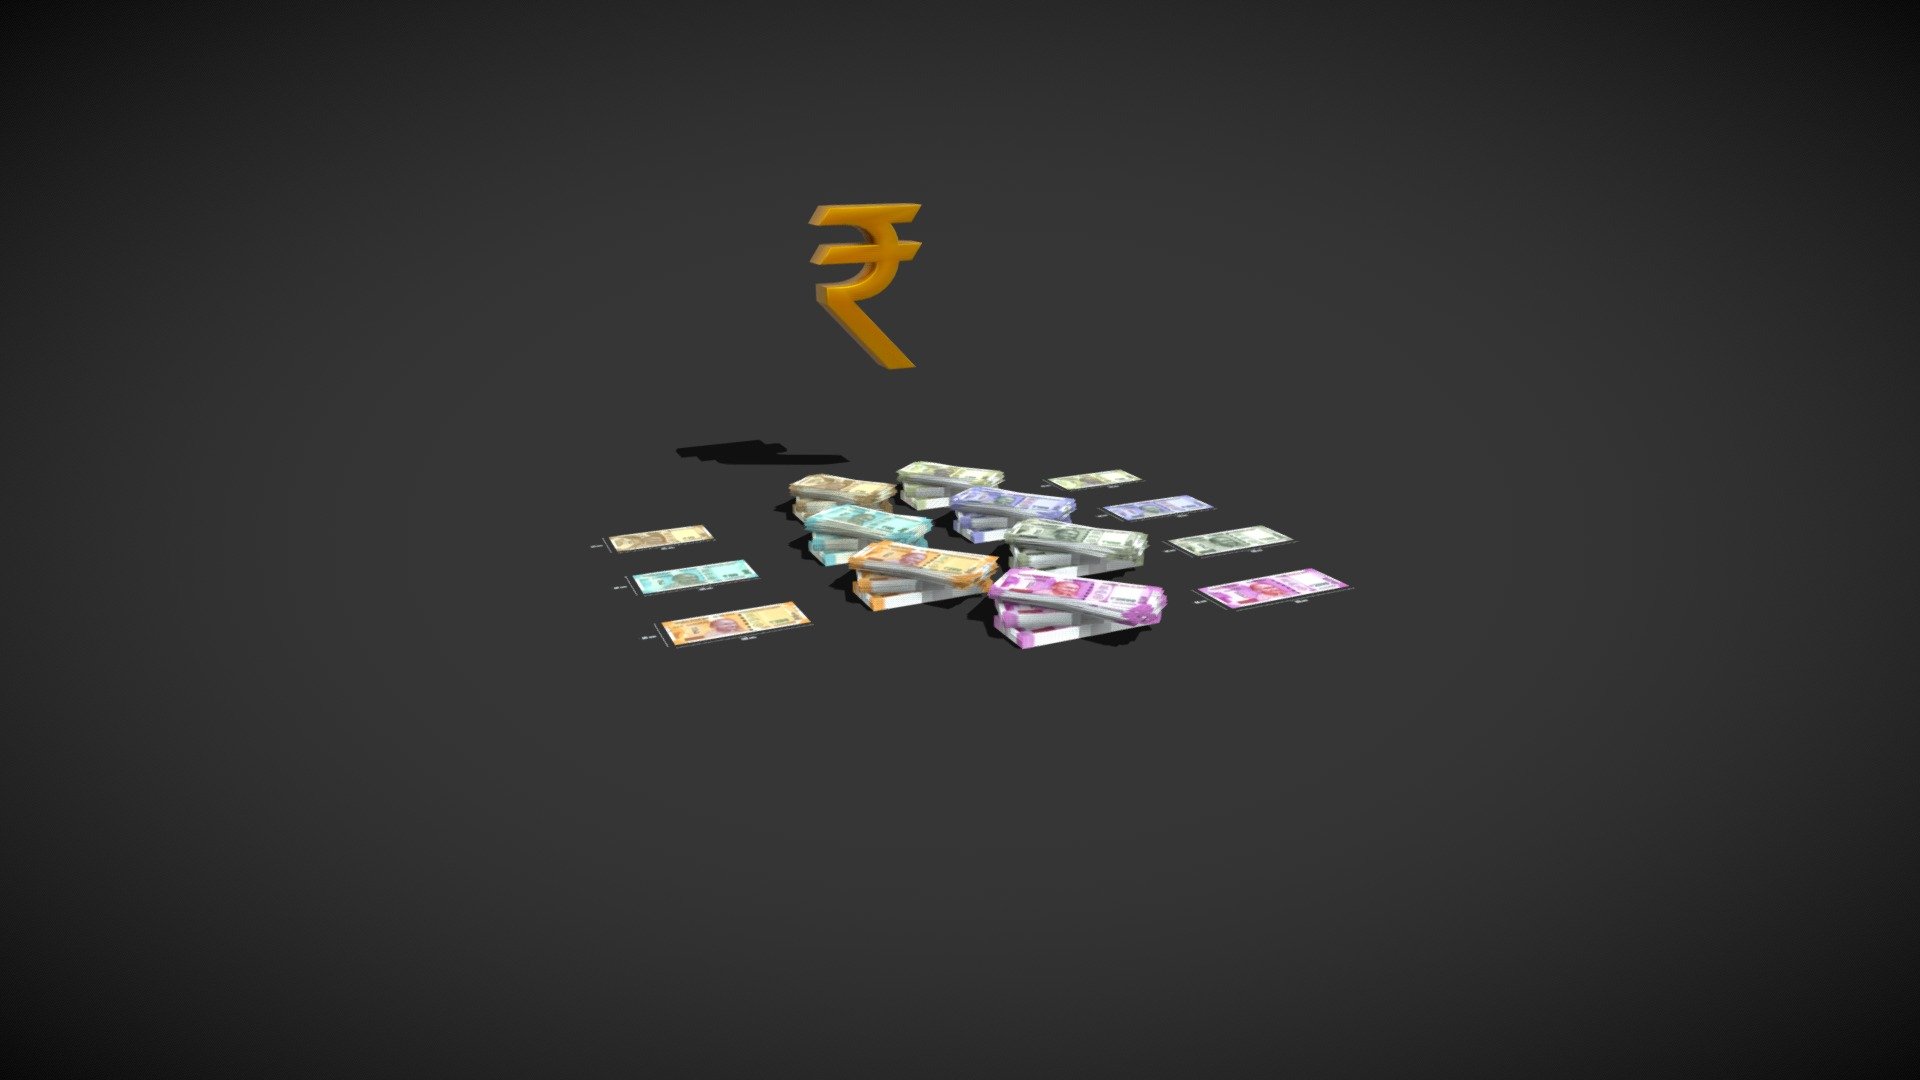 Rupee ₹
Here are Double Sided 7 Main Rupees Single Notes &amp; Bundles with the exact Proposition.

it contains 10, 20, 50, 100, 200, 500, 2000 ₹ Single Notes, and Bundles,

3 types of bundle containing 100 notes each.




Bottom bundle of notes is arranged exactly on each other,

Middle bundle of notes has a little randomness in its position,

Top bundle is not tied with band and so has more rendomness in the position of notes.

and a Rupee Symbol - Indian Currency Note - Rupee ₹ - Buy Royalty Free 3D model by 5th Dimension (@5th-Dimension) 3d model